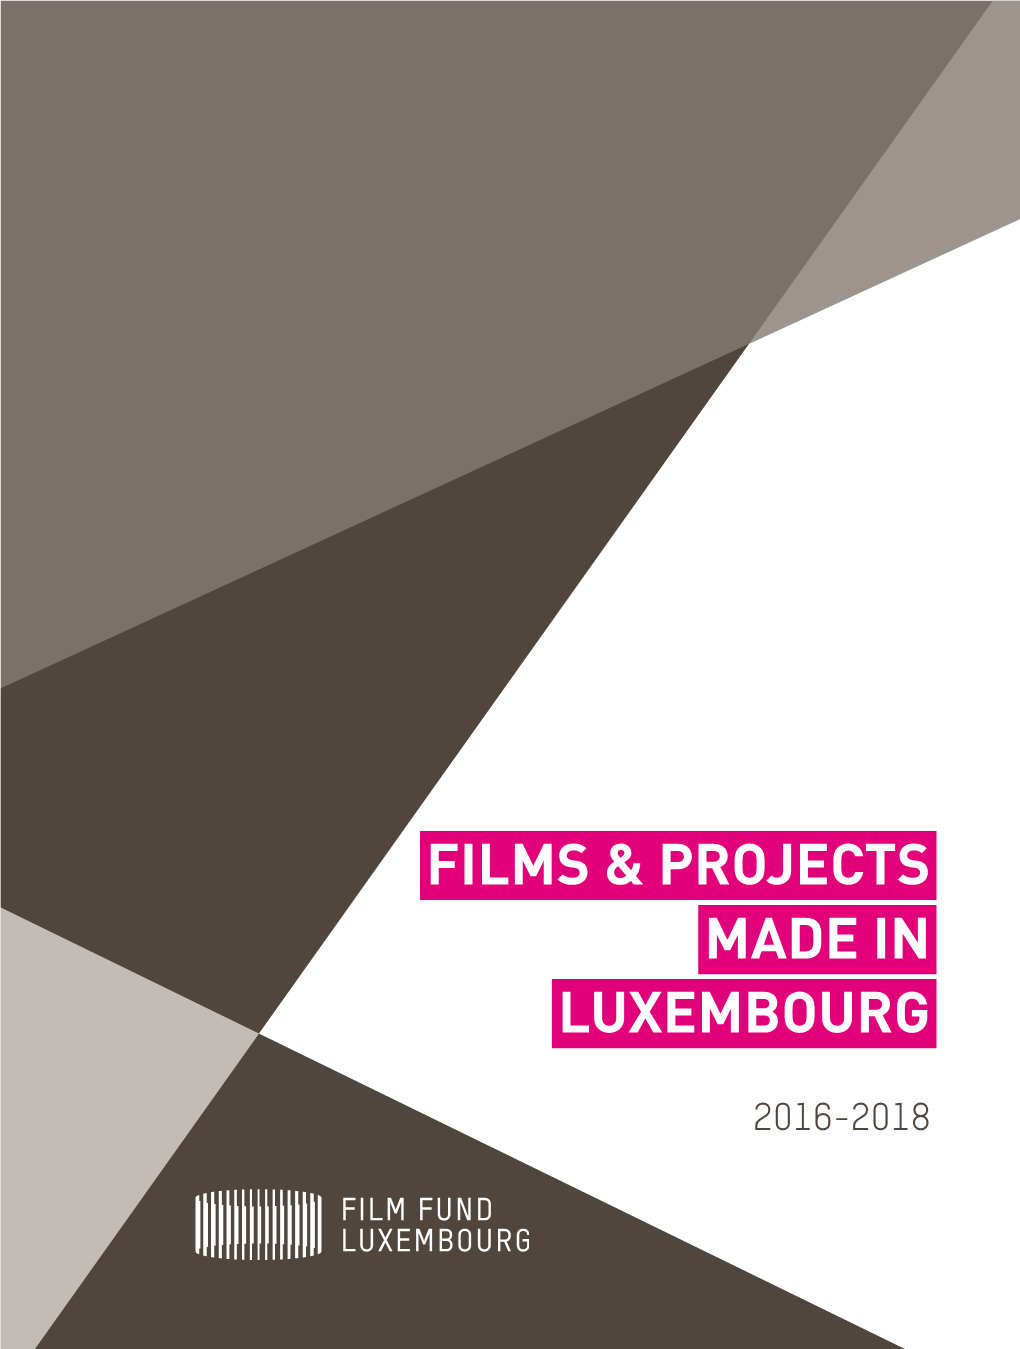 Films & Projects 2016-2018